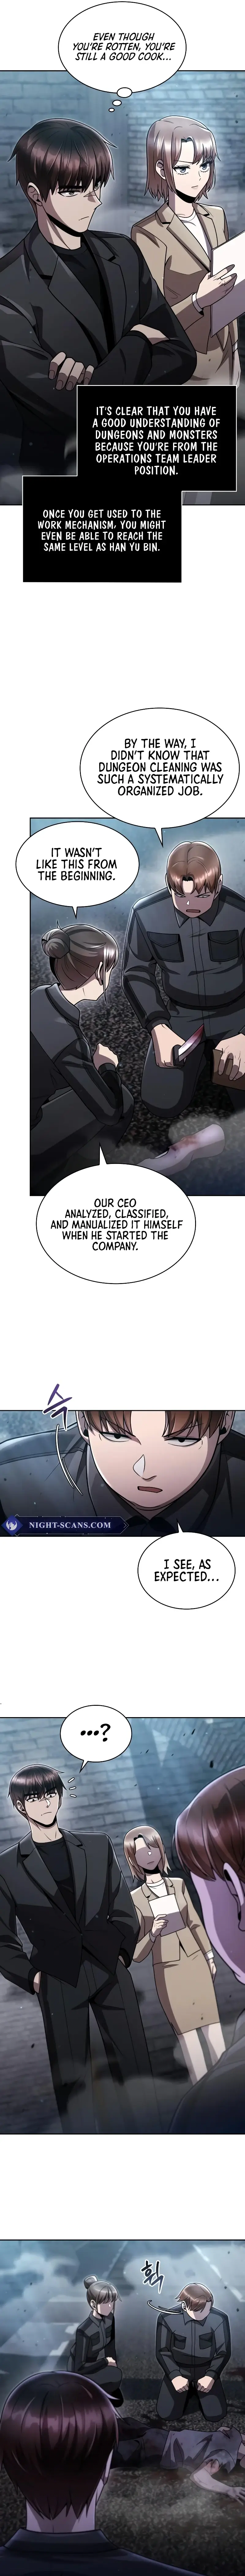 Clever Cleaning Life Of The Returned Genius Hunter - 75 page 4-dc4f3f2f